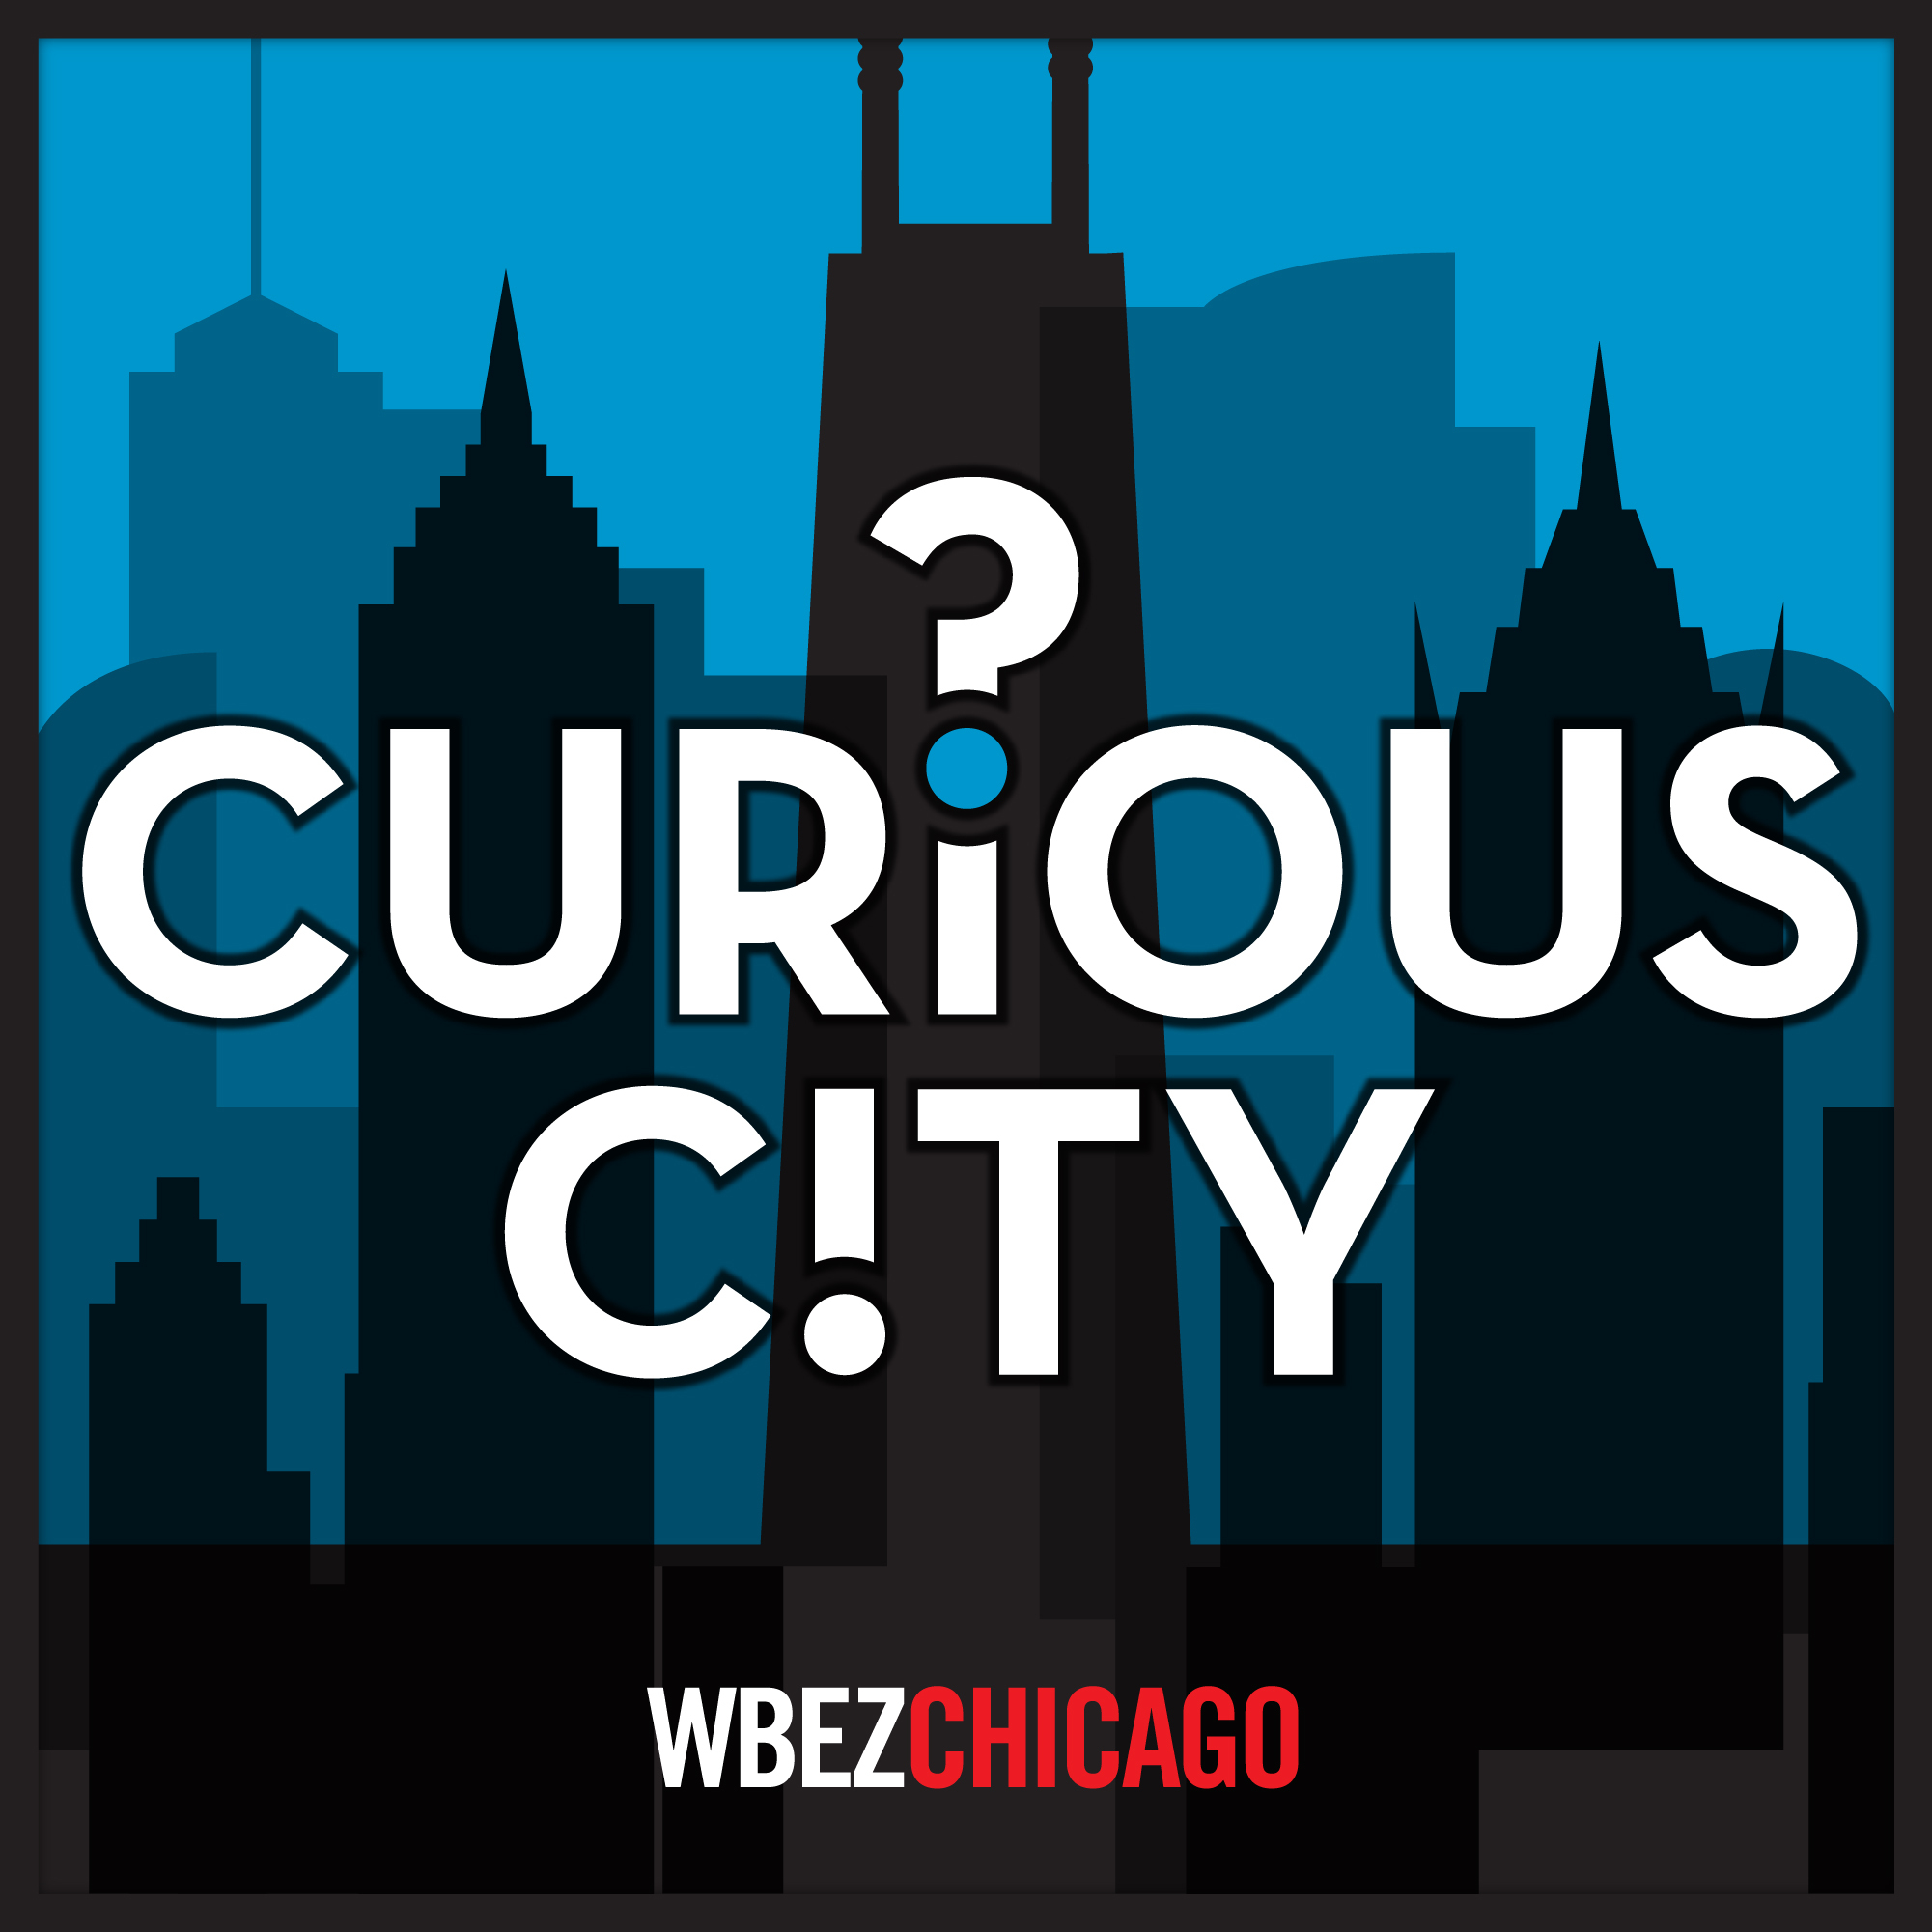 Beer and Bar Culture In Chicago: Curious City Live from Carol’s Pub